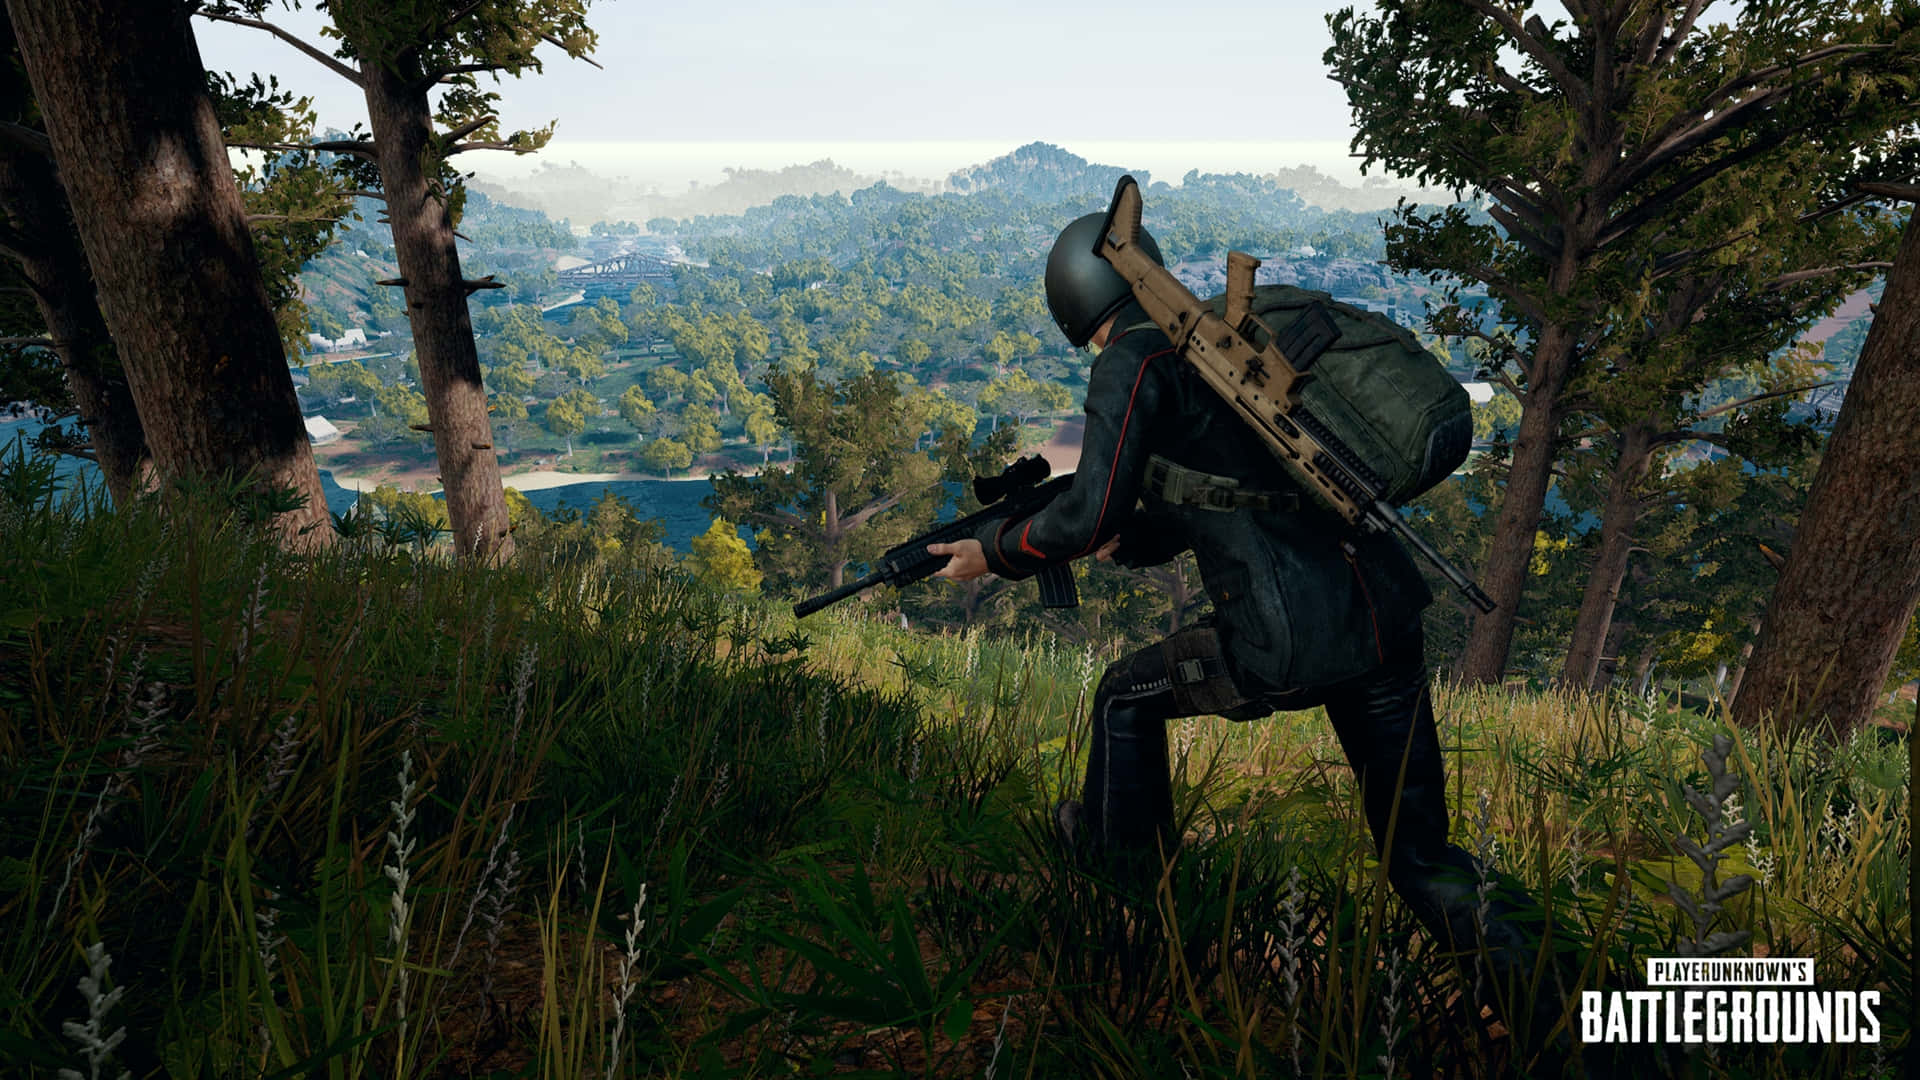 Immerse yourself in the high-adrenaline Battle Royale experience of Playerunknown's Battlegrounds